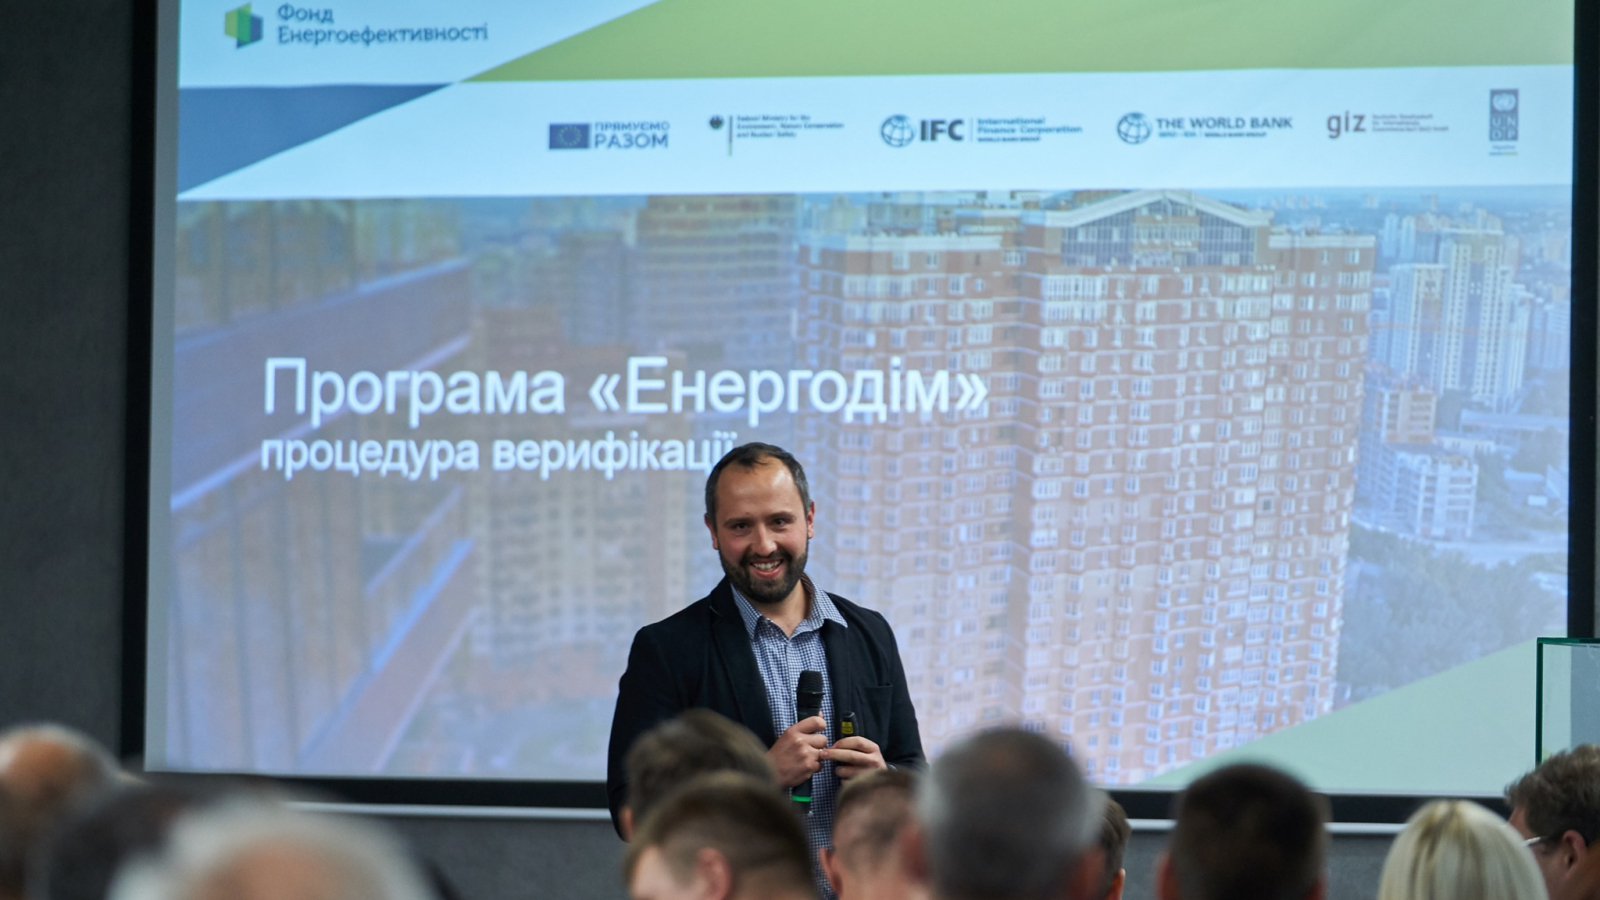 Ukrainian Forum on Energy Efficiency gathers hundreds of participants in Kyiv 